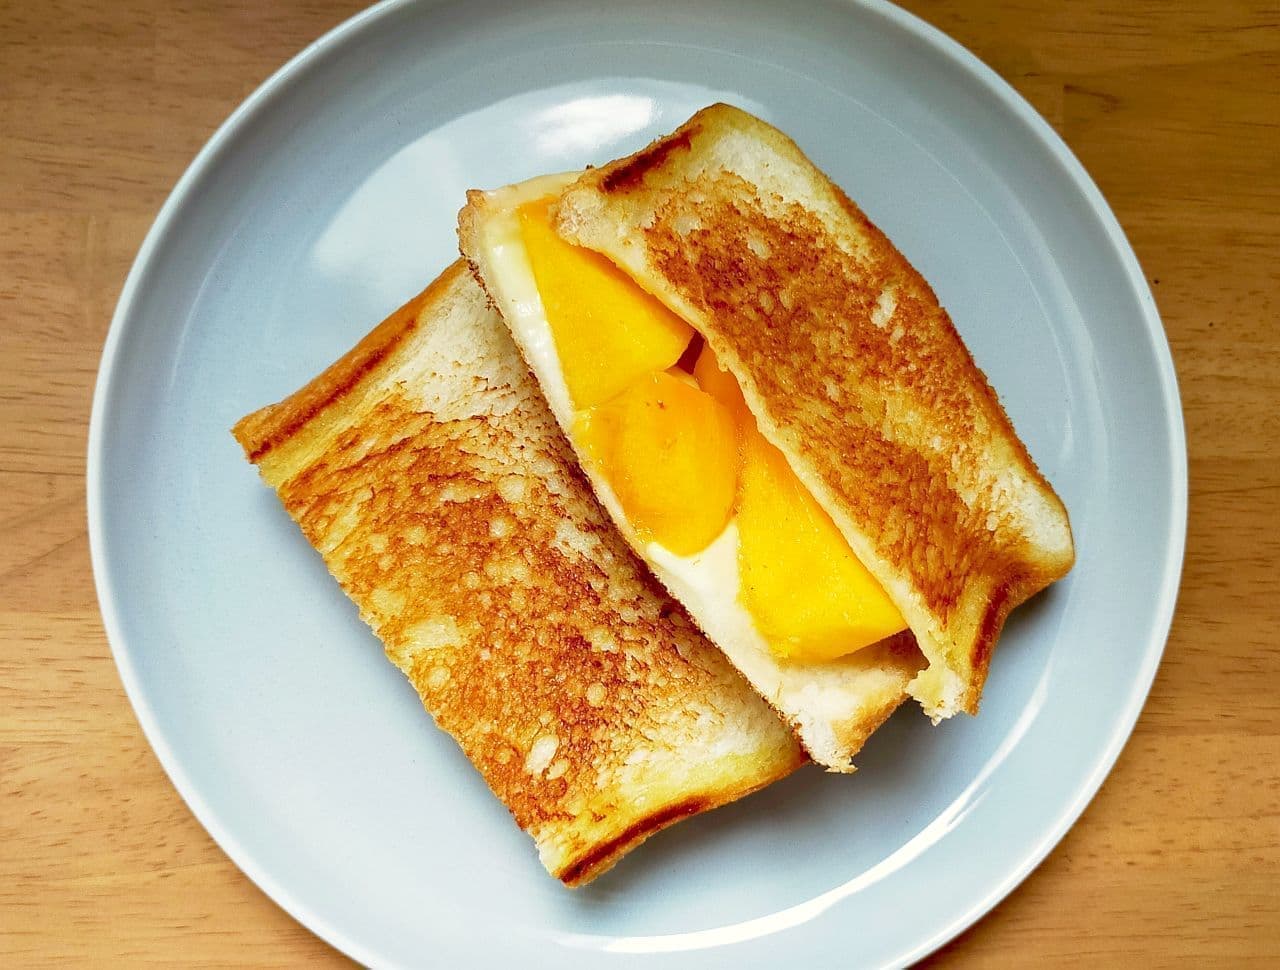 Easy recipe for "hot sandwich of persimmon and cheese" that can be made with a frying pan